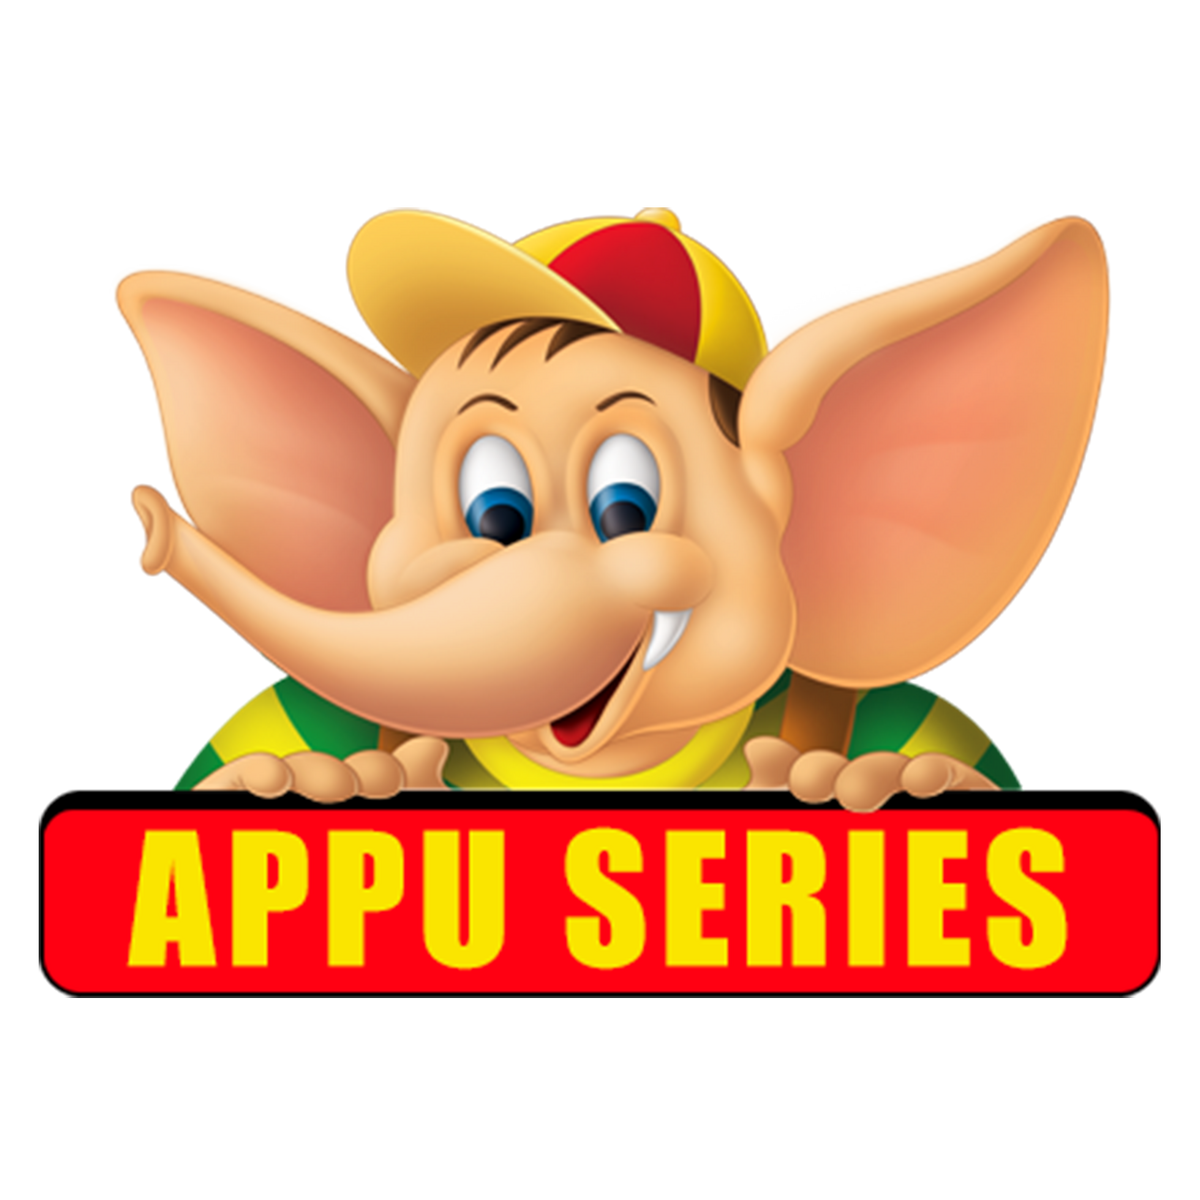 appuseries for Apple TV by FutureToday Inc